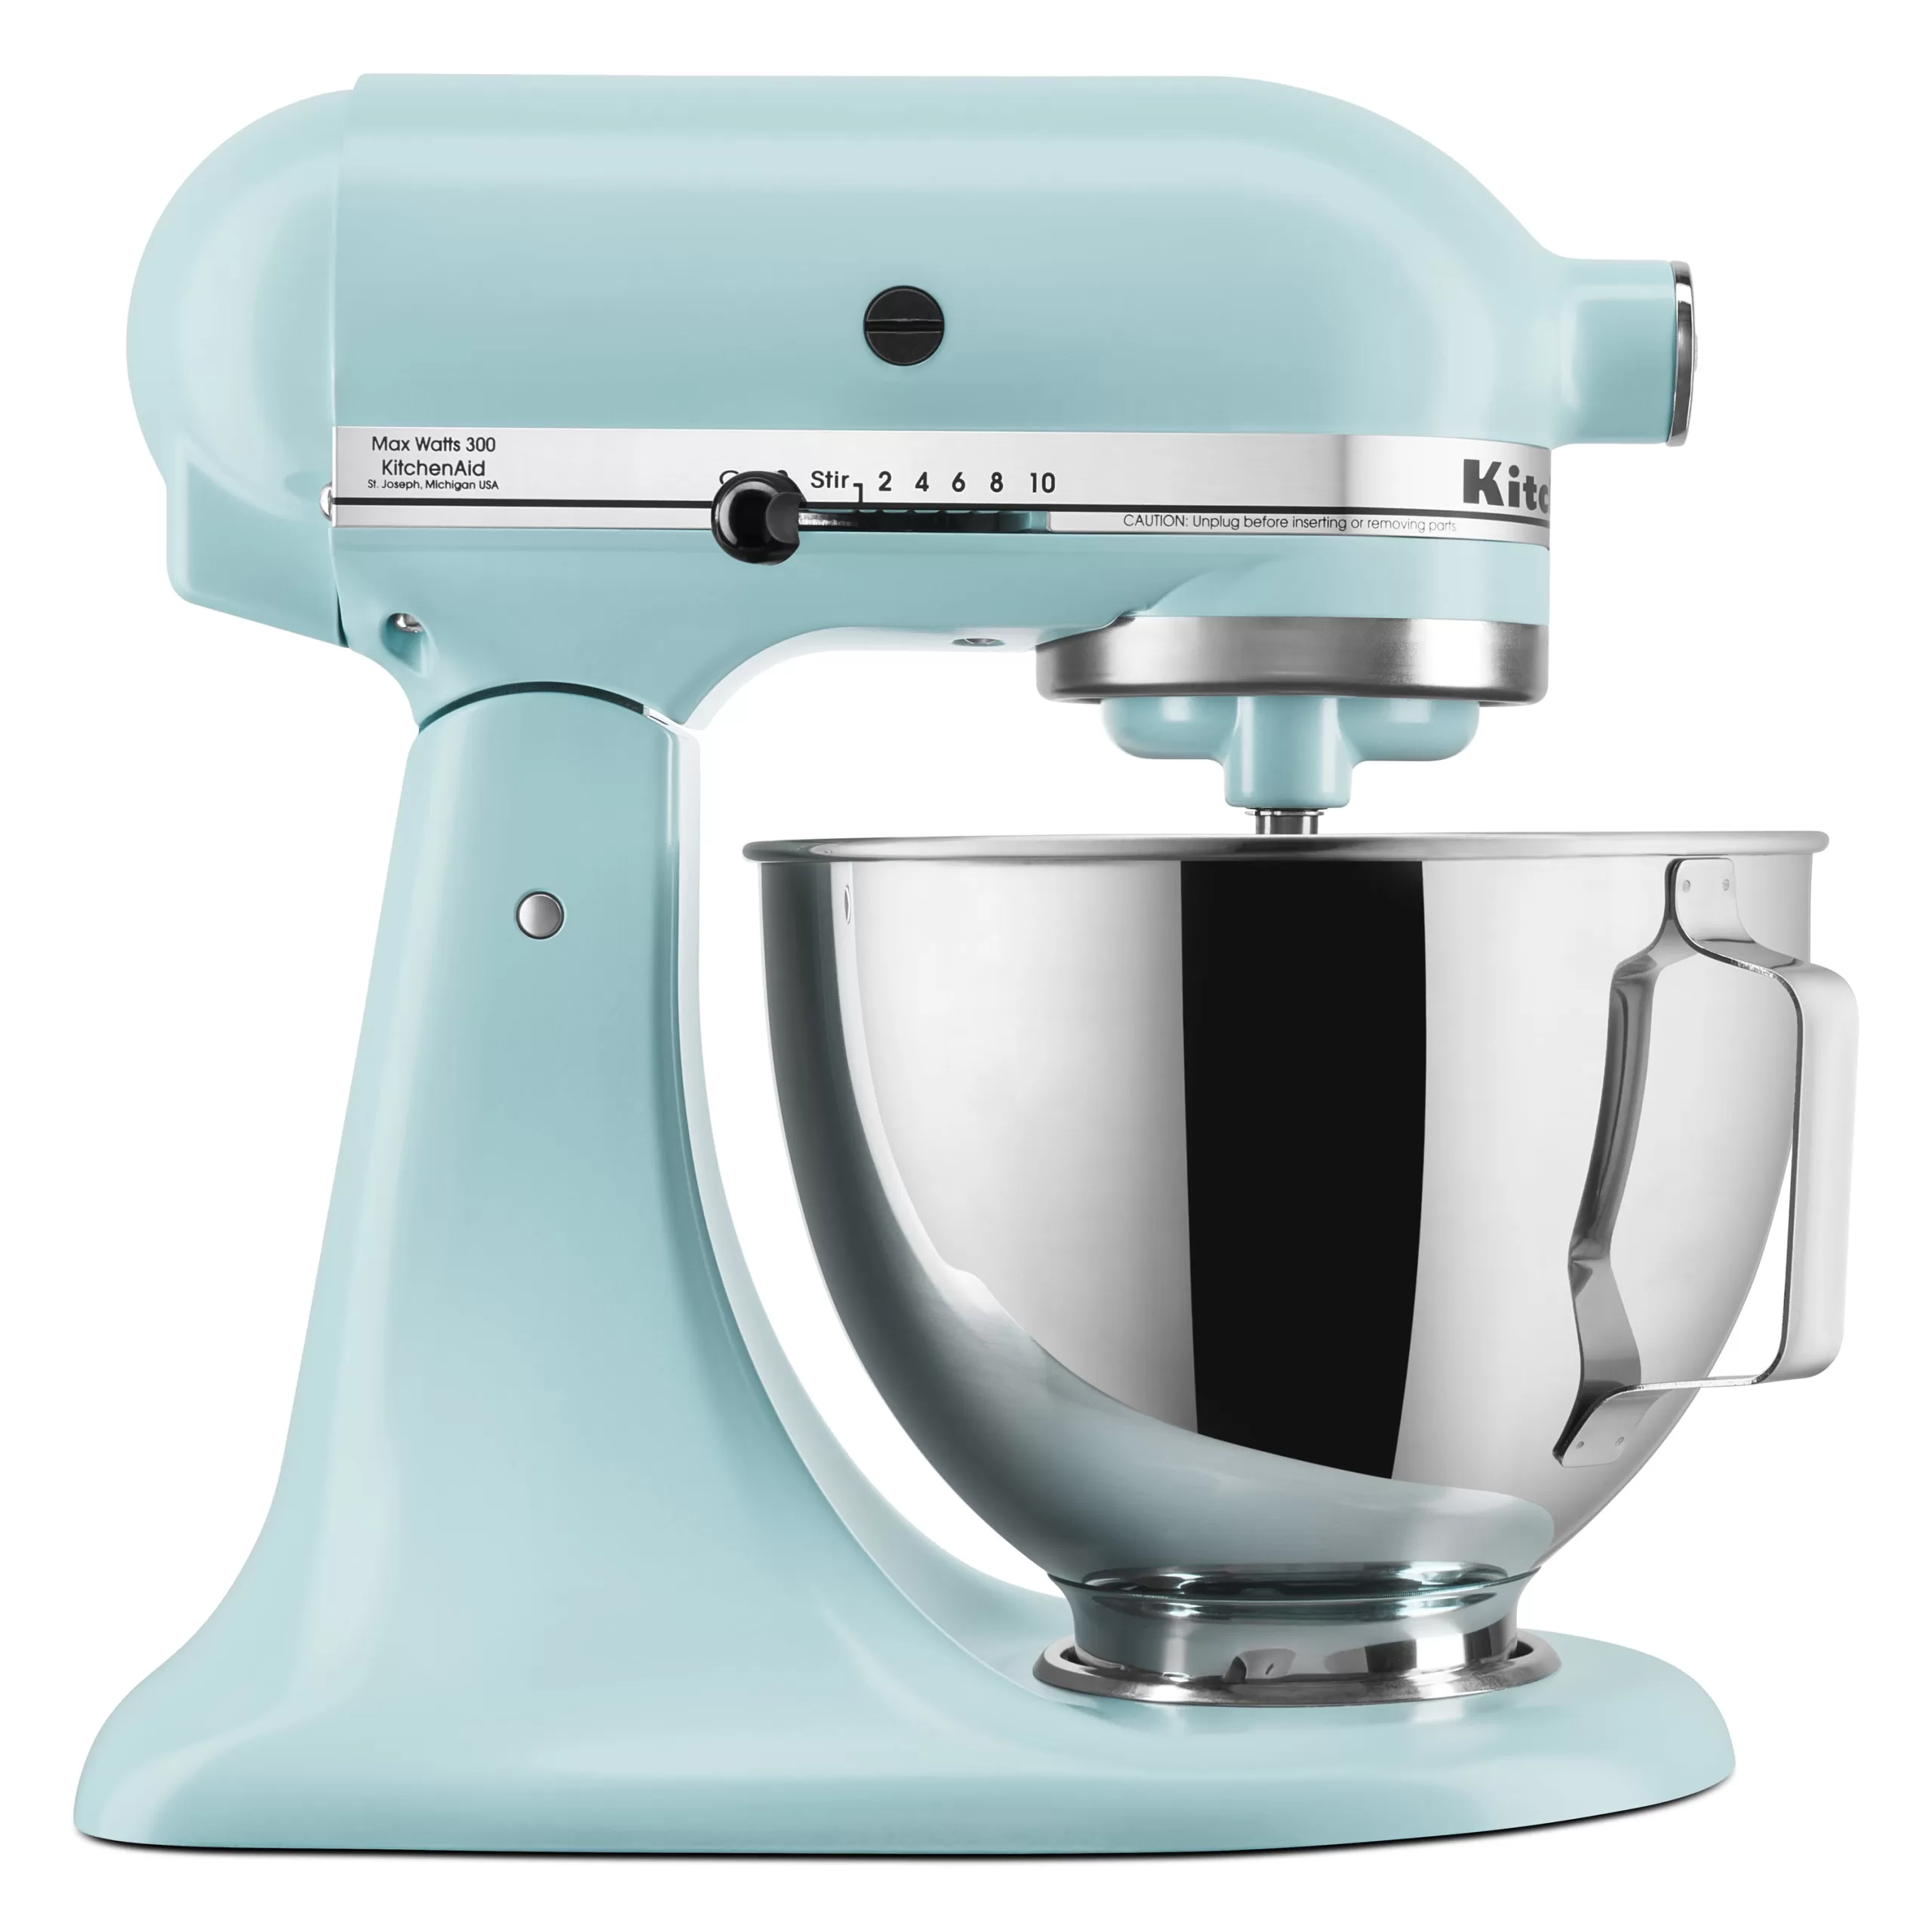 pack-a-kitchenaid-mixer-for-moving